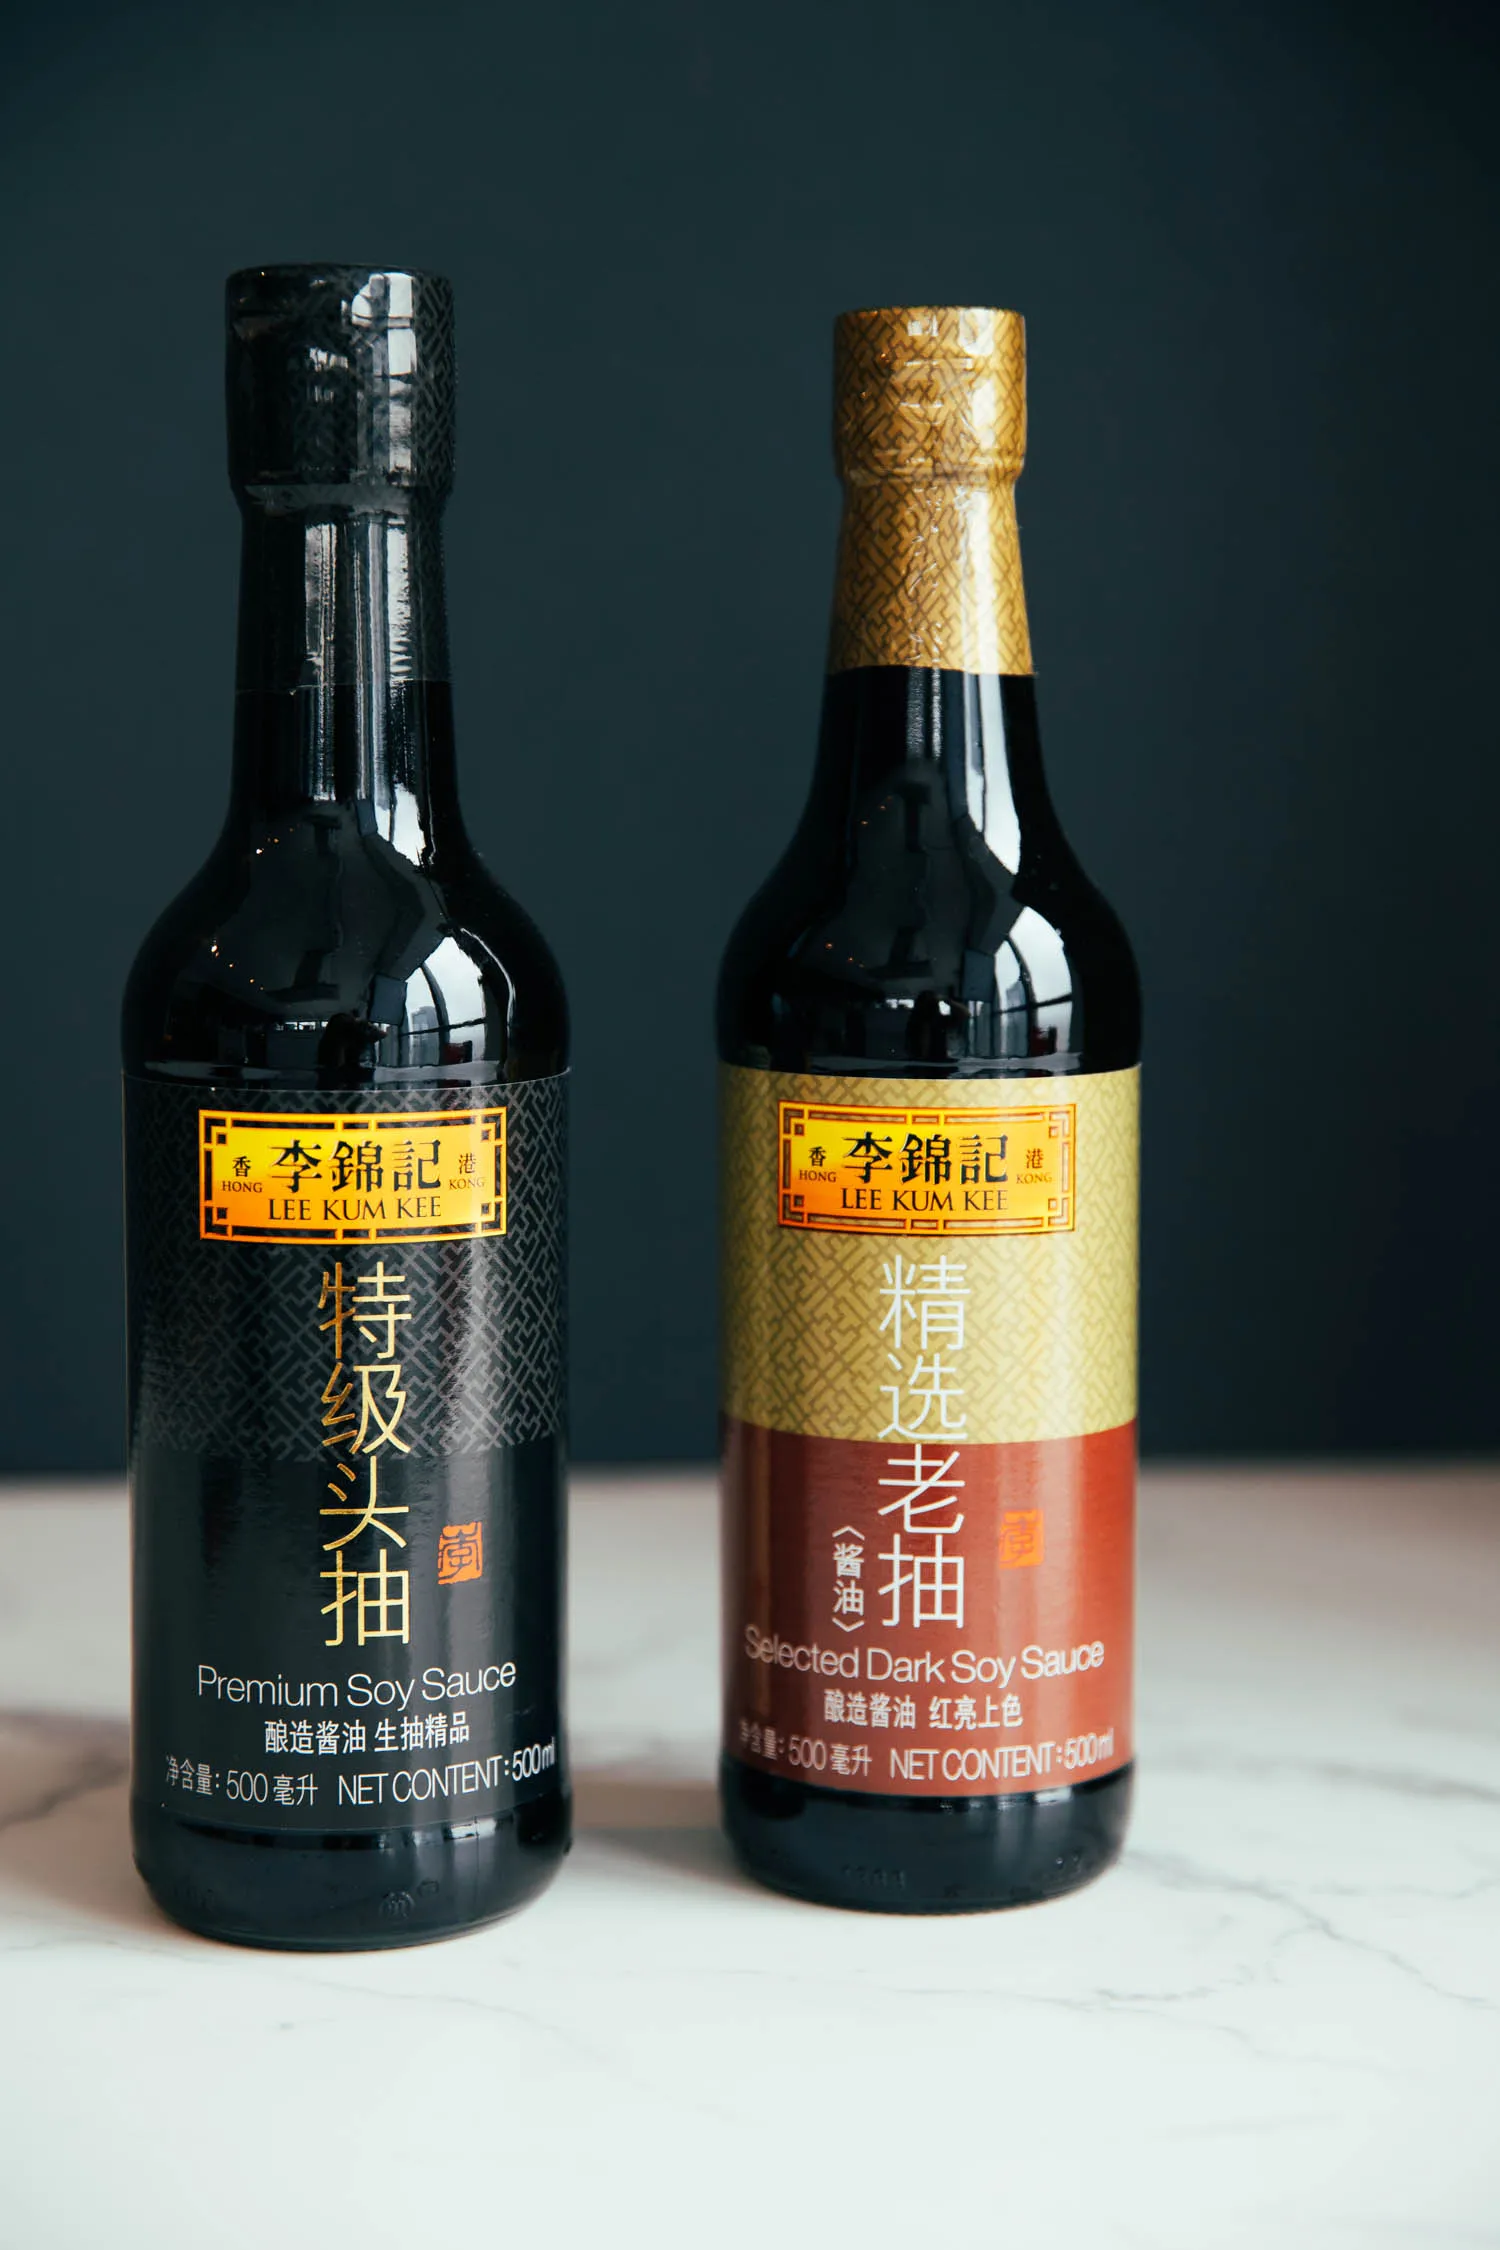 Dark Soy Sauce, What it is and Substitutes - China Sichuan Food